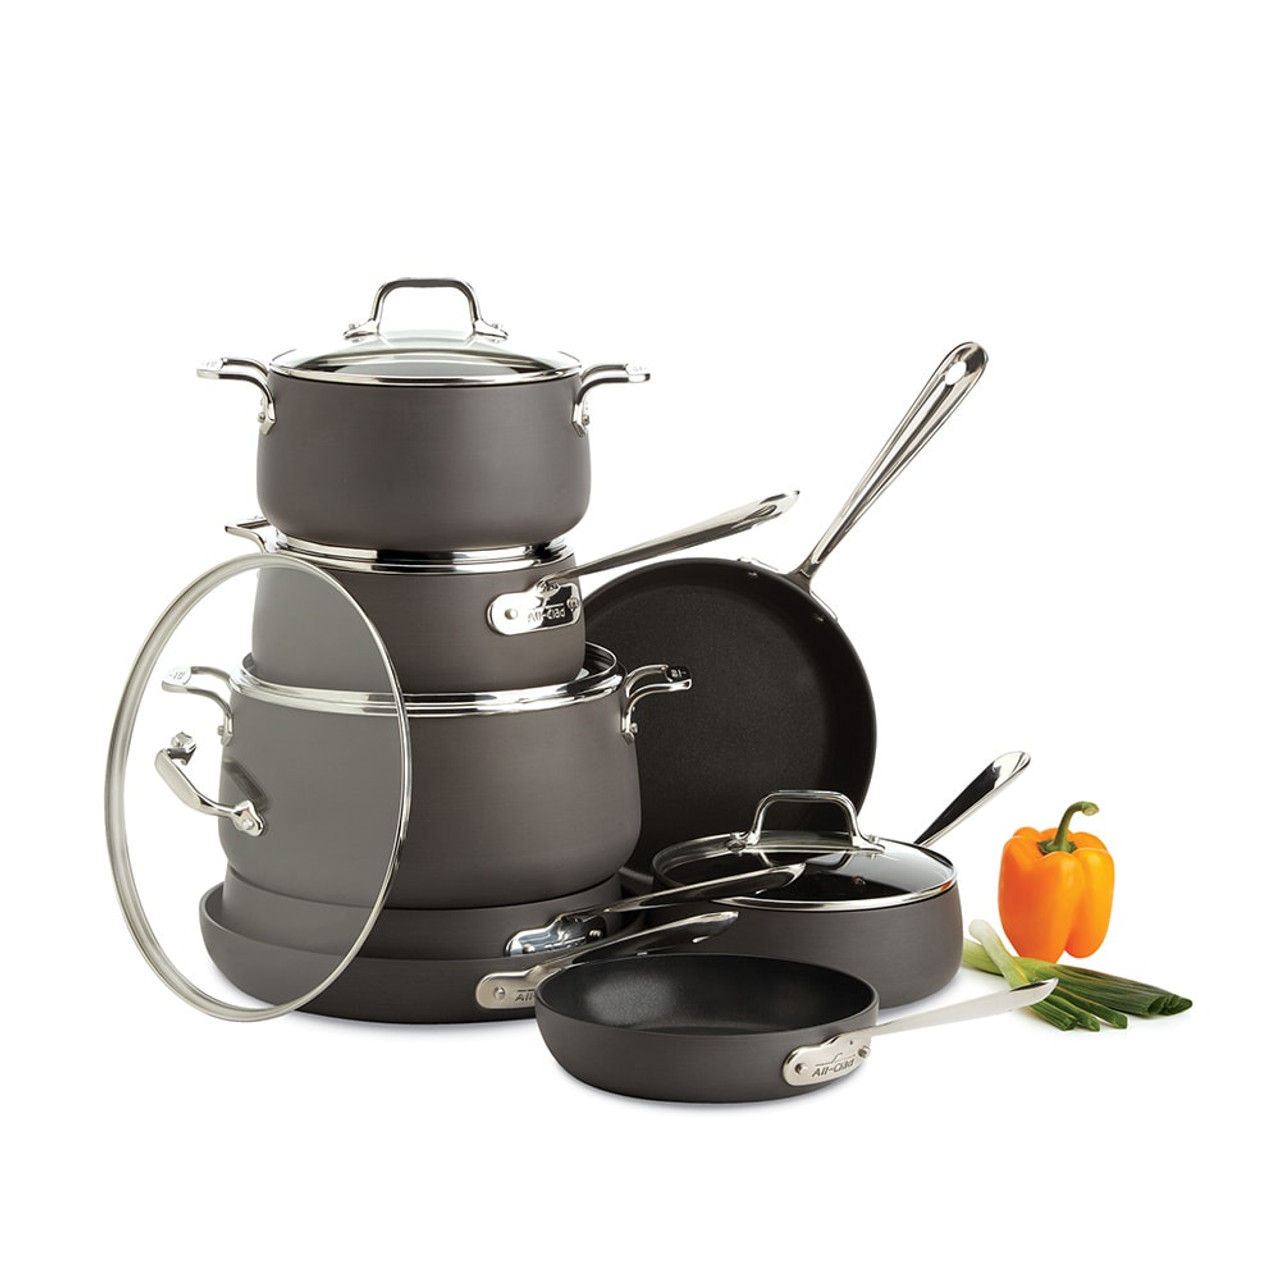 https://cdn11.bigcommerce.com/s-hccytny0od/images/stencil/1280x1280/products/519/8406/all-clad-ha1-13-piece-cookware-set-1__84537.1576080481.jpg?c=2?imbypass=on